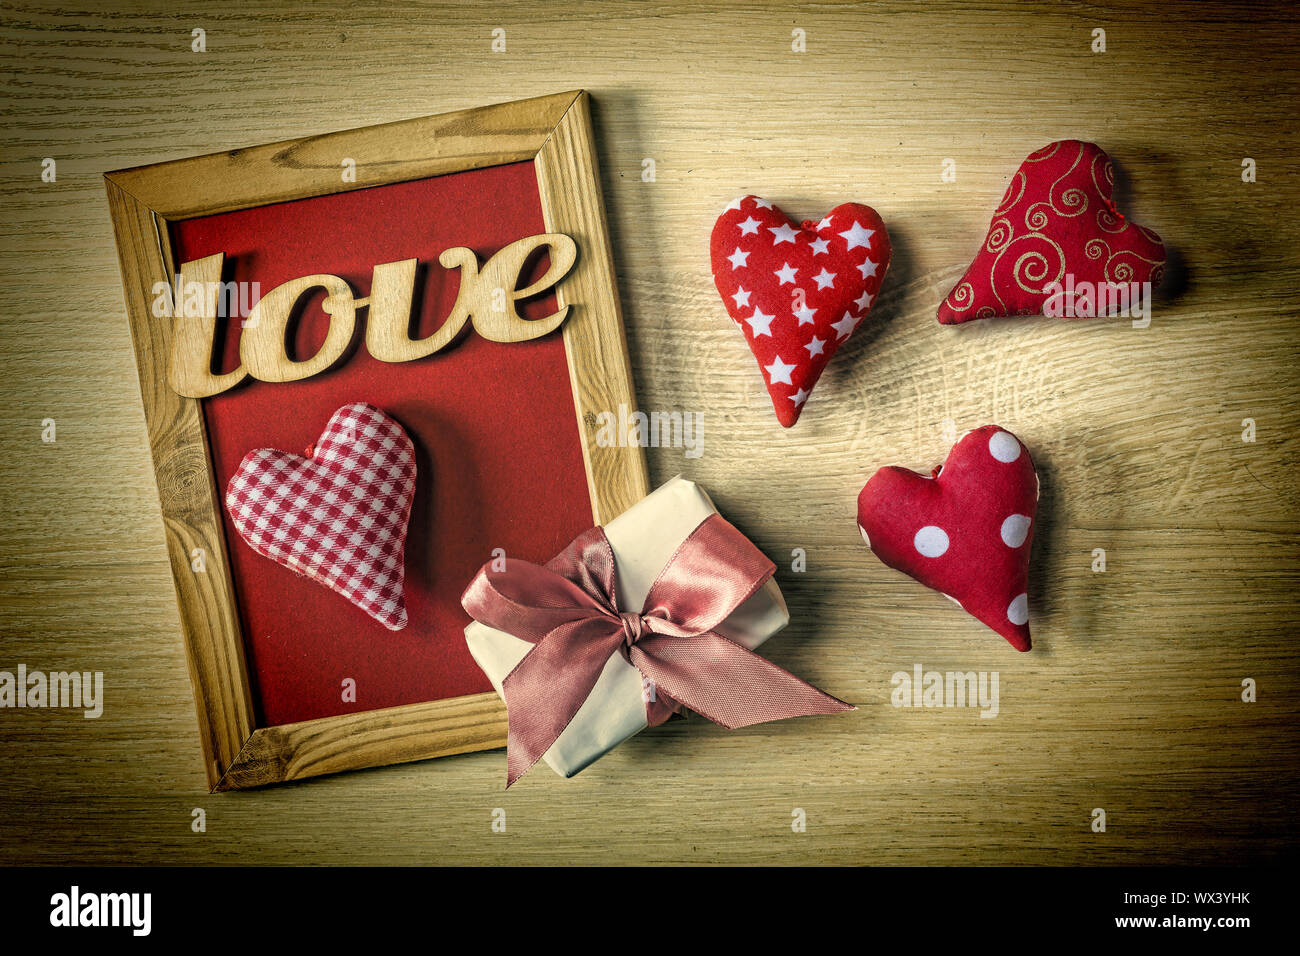 Card Valentine's Day, love, holiday, greeting, frame, Stock Photo